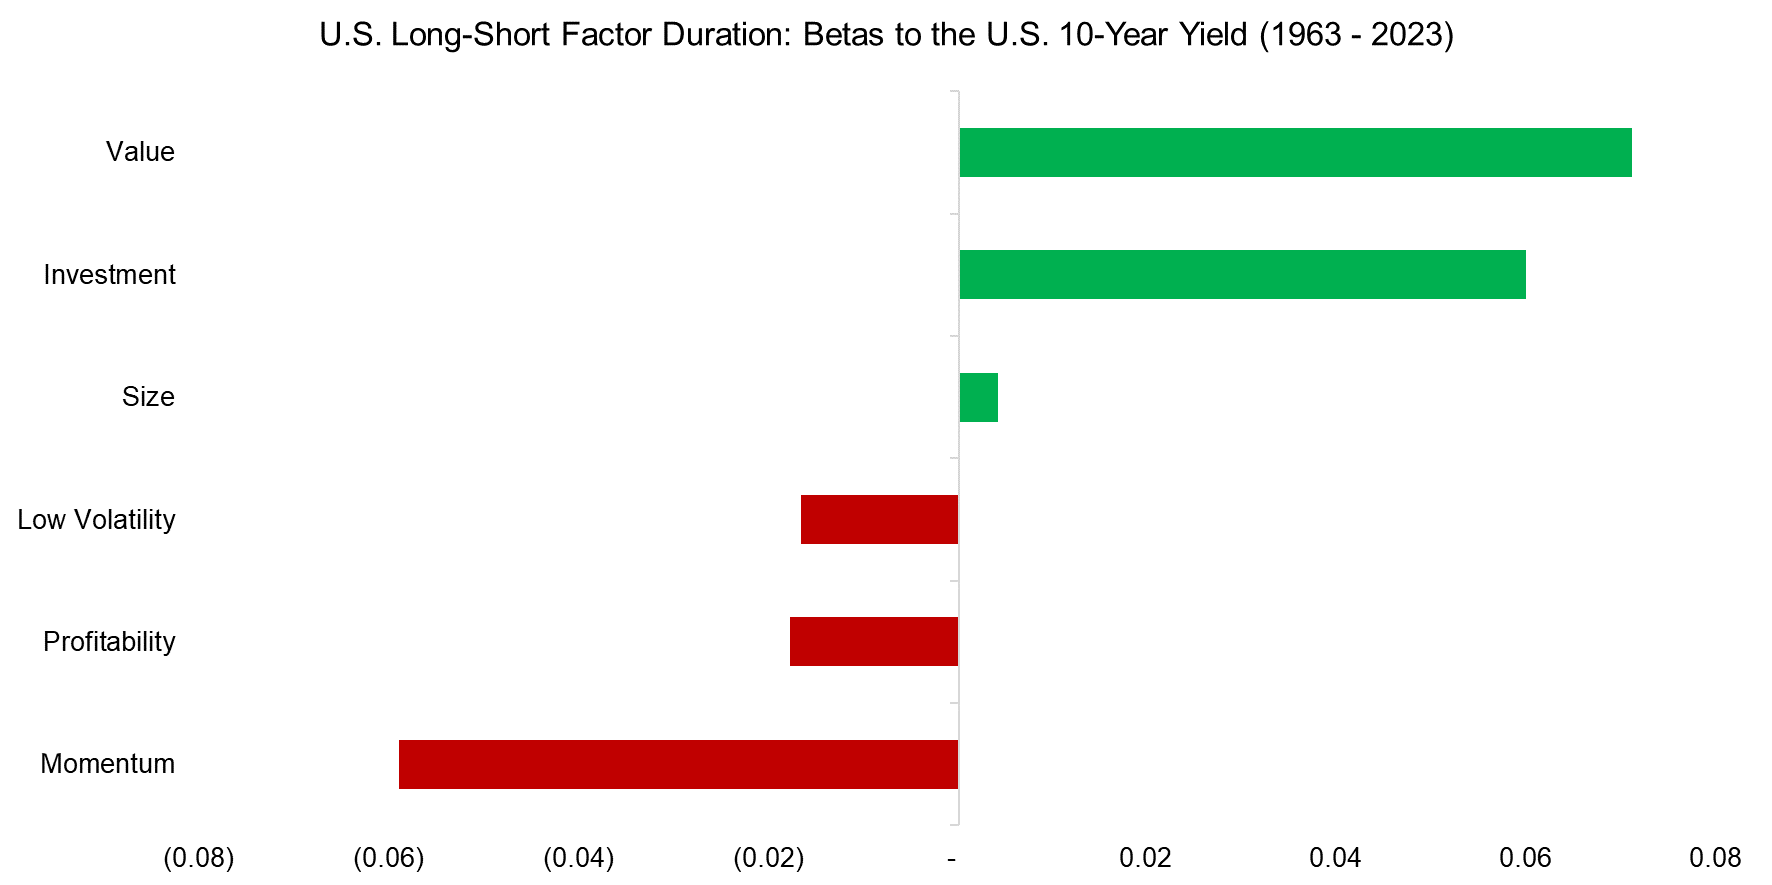 U.S. Long-Short Factor Duration Betas to the U.S. 10-Year Yield (1963 - 2023)